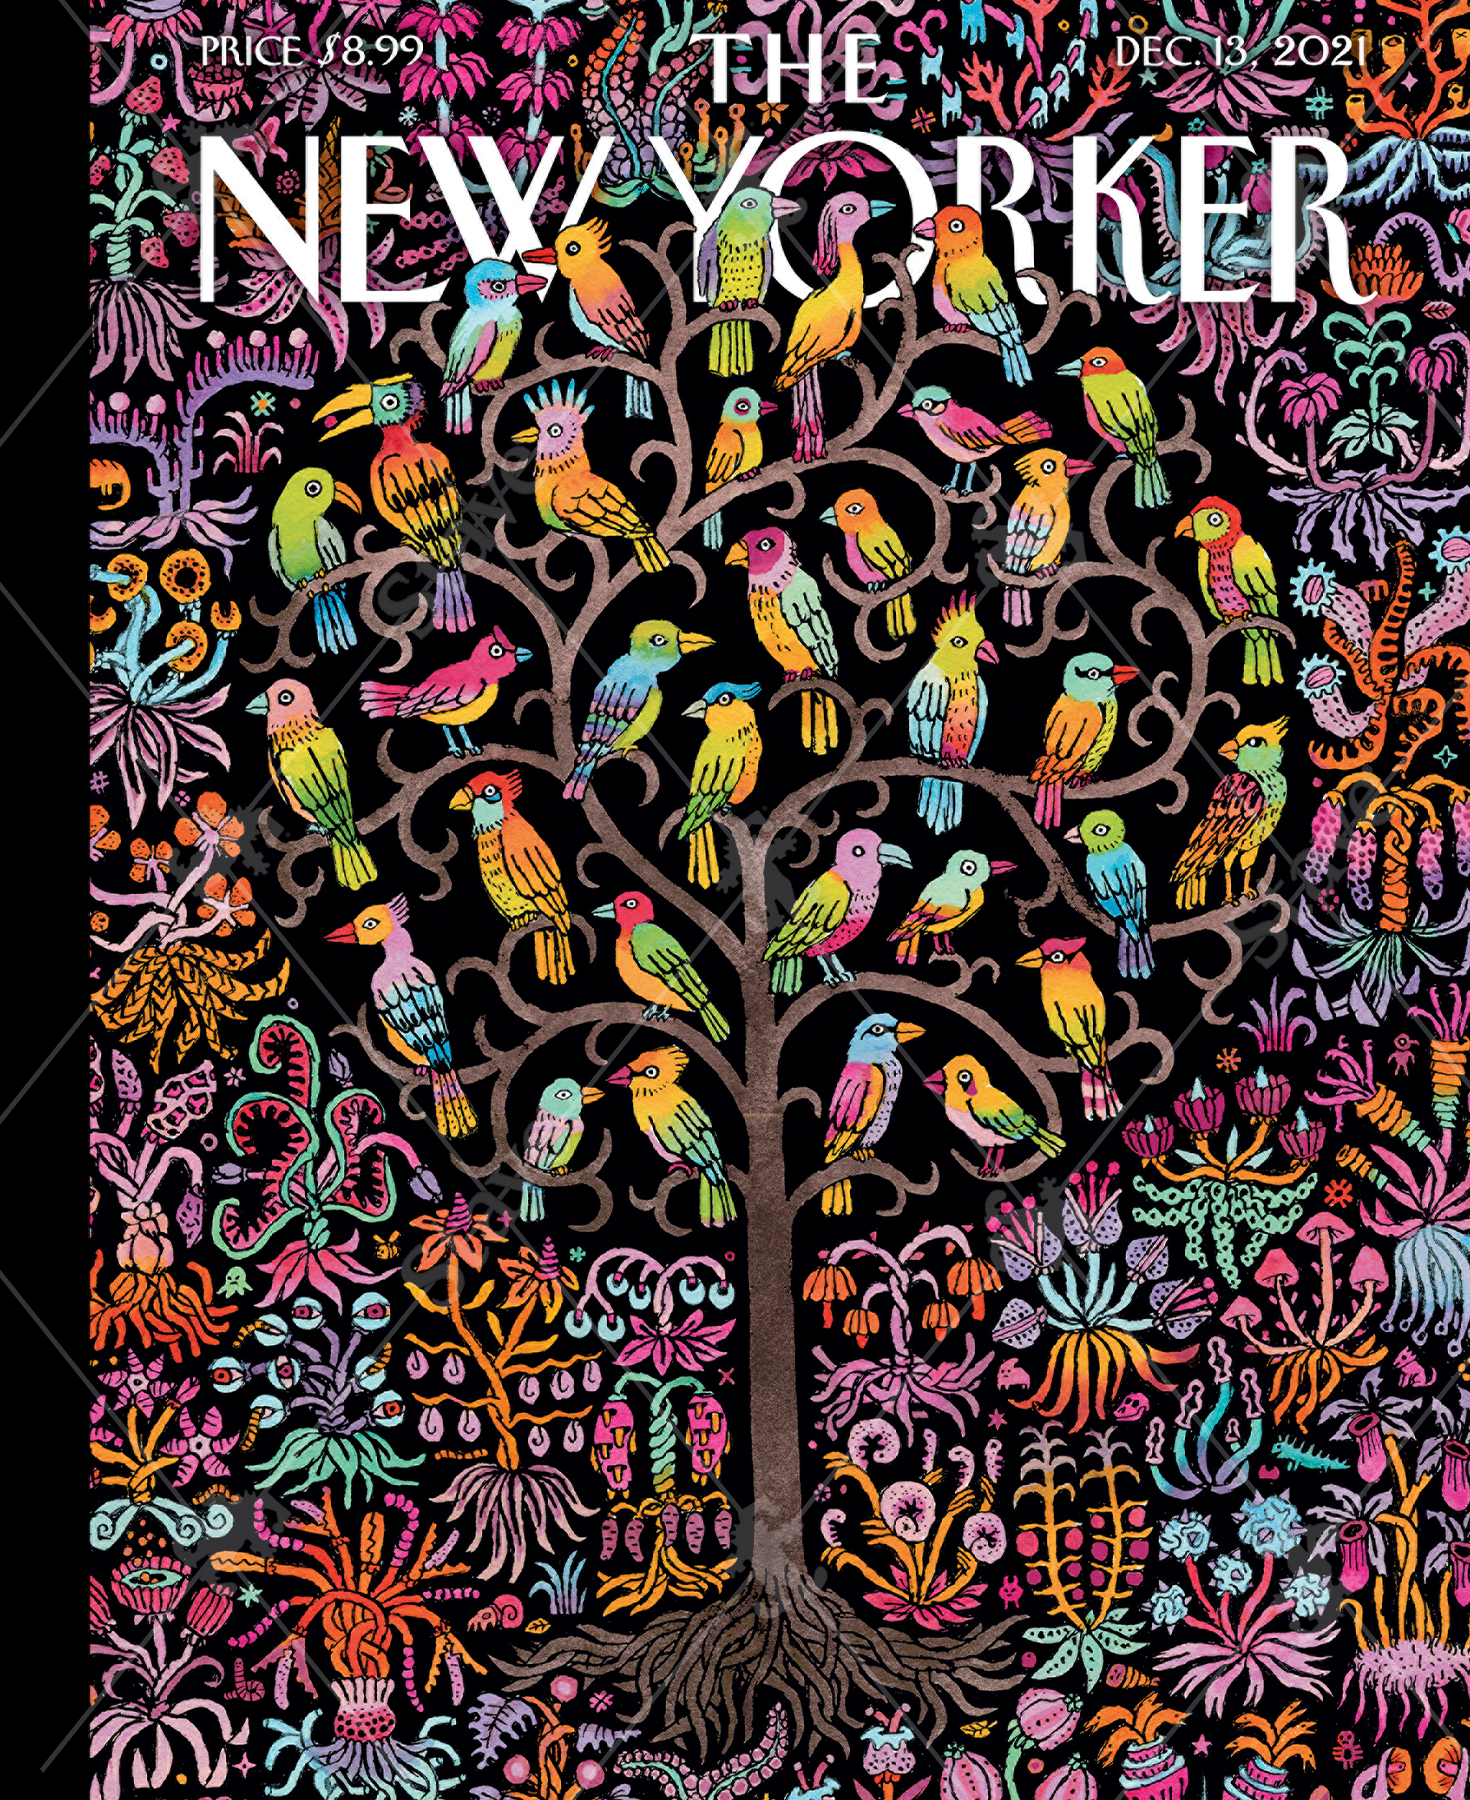 Close up of December 12, 2021 wooden jigsaw puzzle of a New Yorker cover featuring a flock of birds sitting in a bare tree, surrounded by vibrant botanicals throughout the entire image.